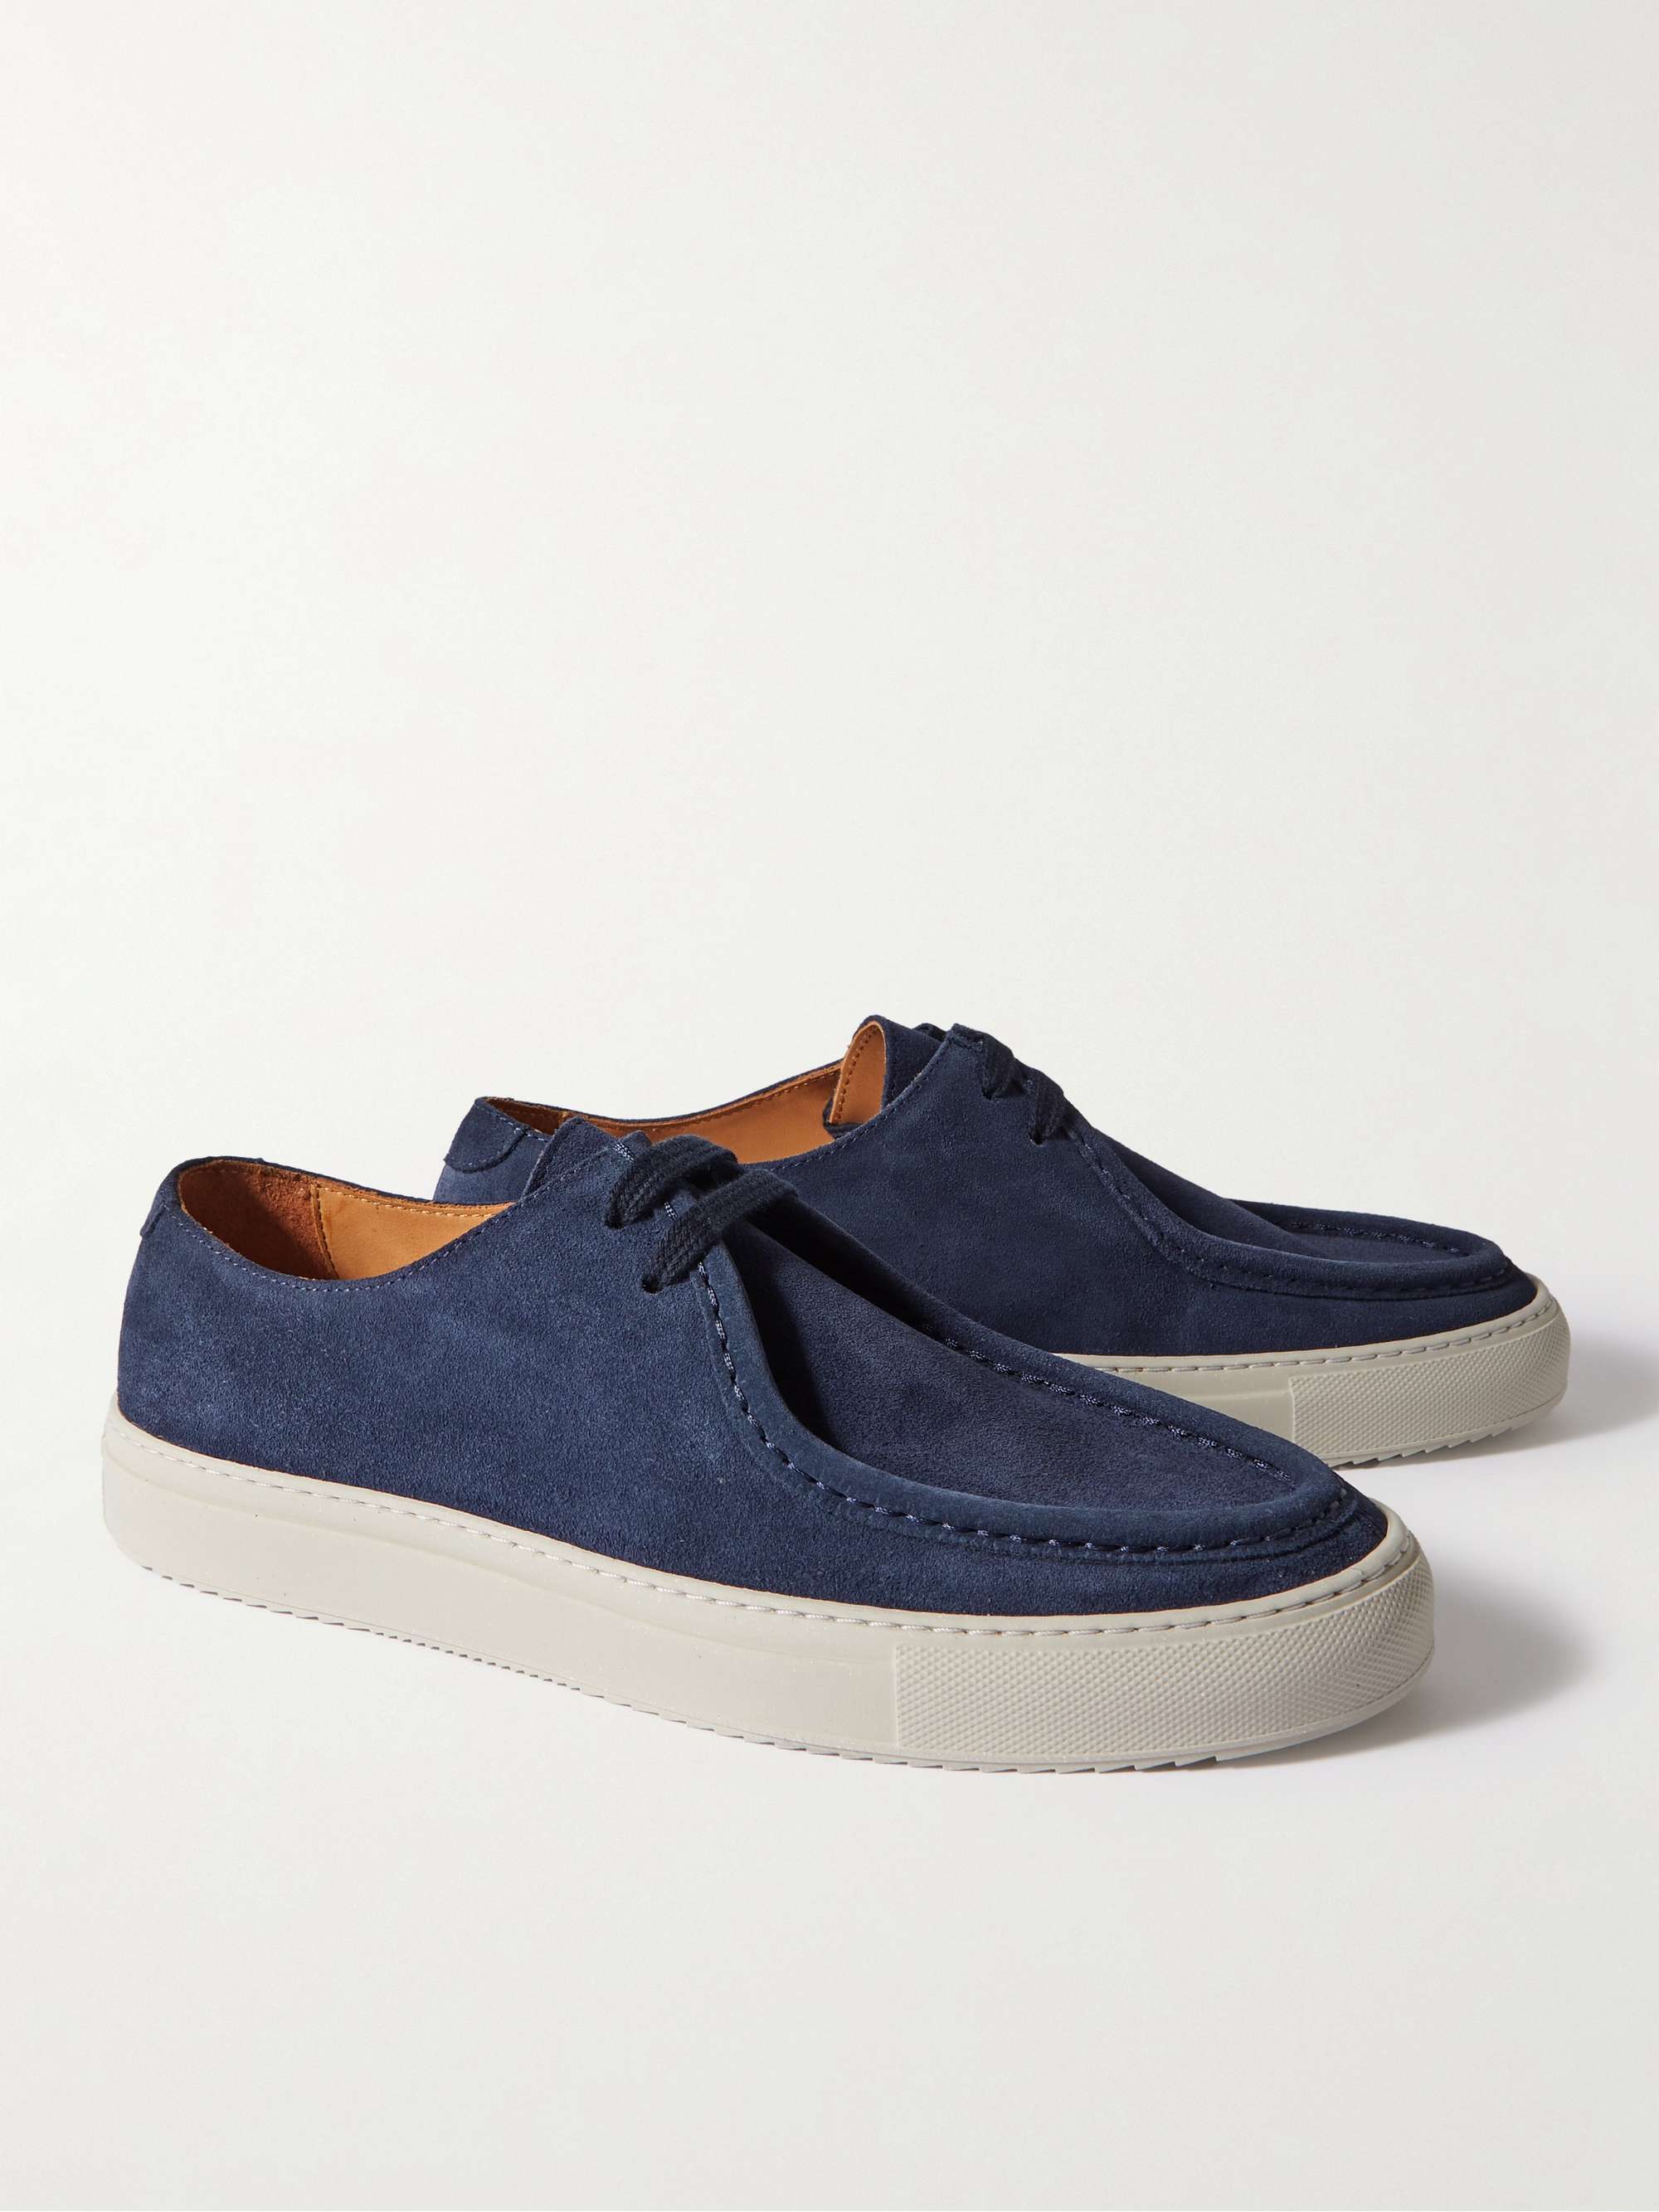 MR P. Larry Regenerated Suede by evolo® Derby Shoes